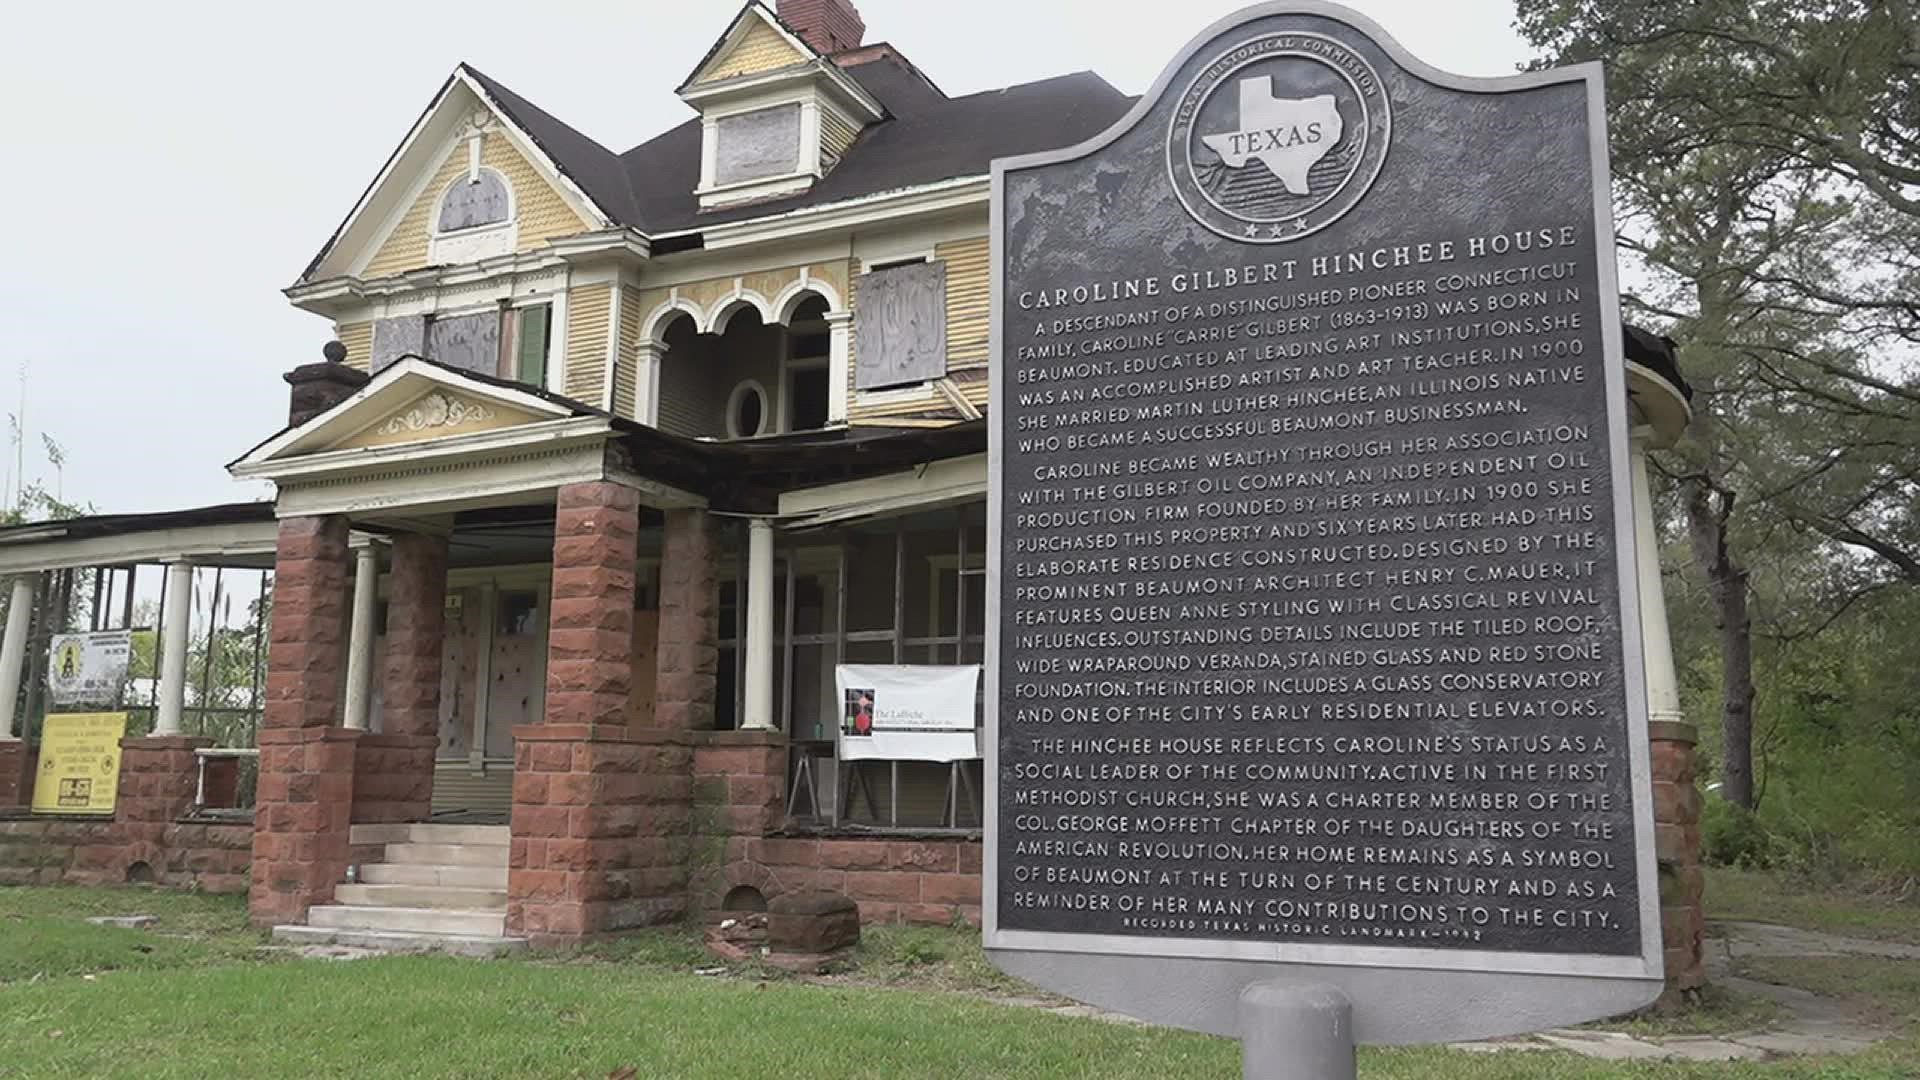 The Caroline Gilbert Hinchee House is a historical home near downtown Beaumont. It is located on the corner of Park Street and Irma Street.